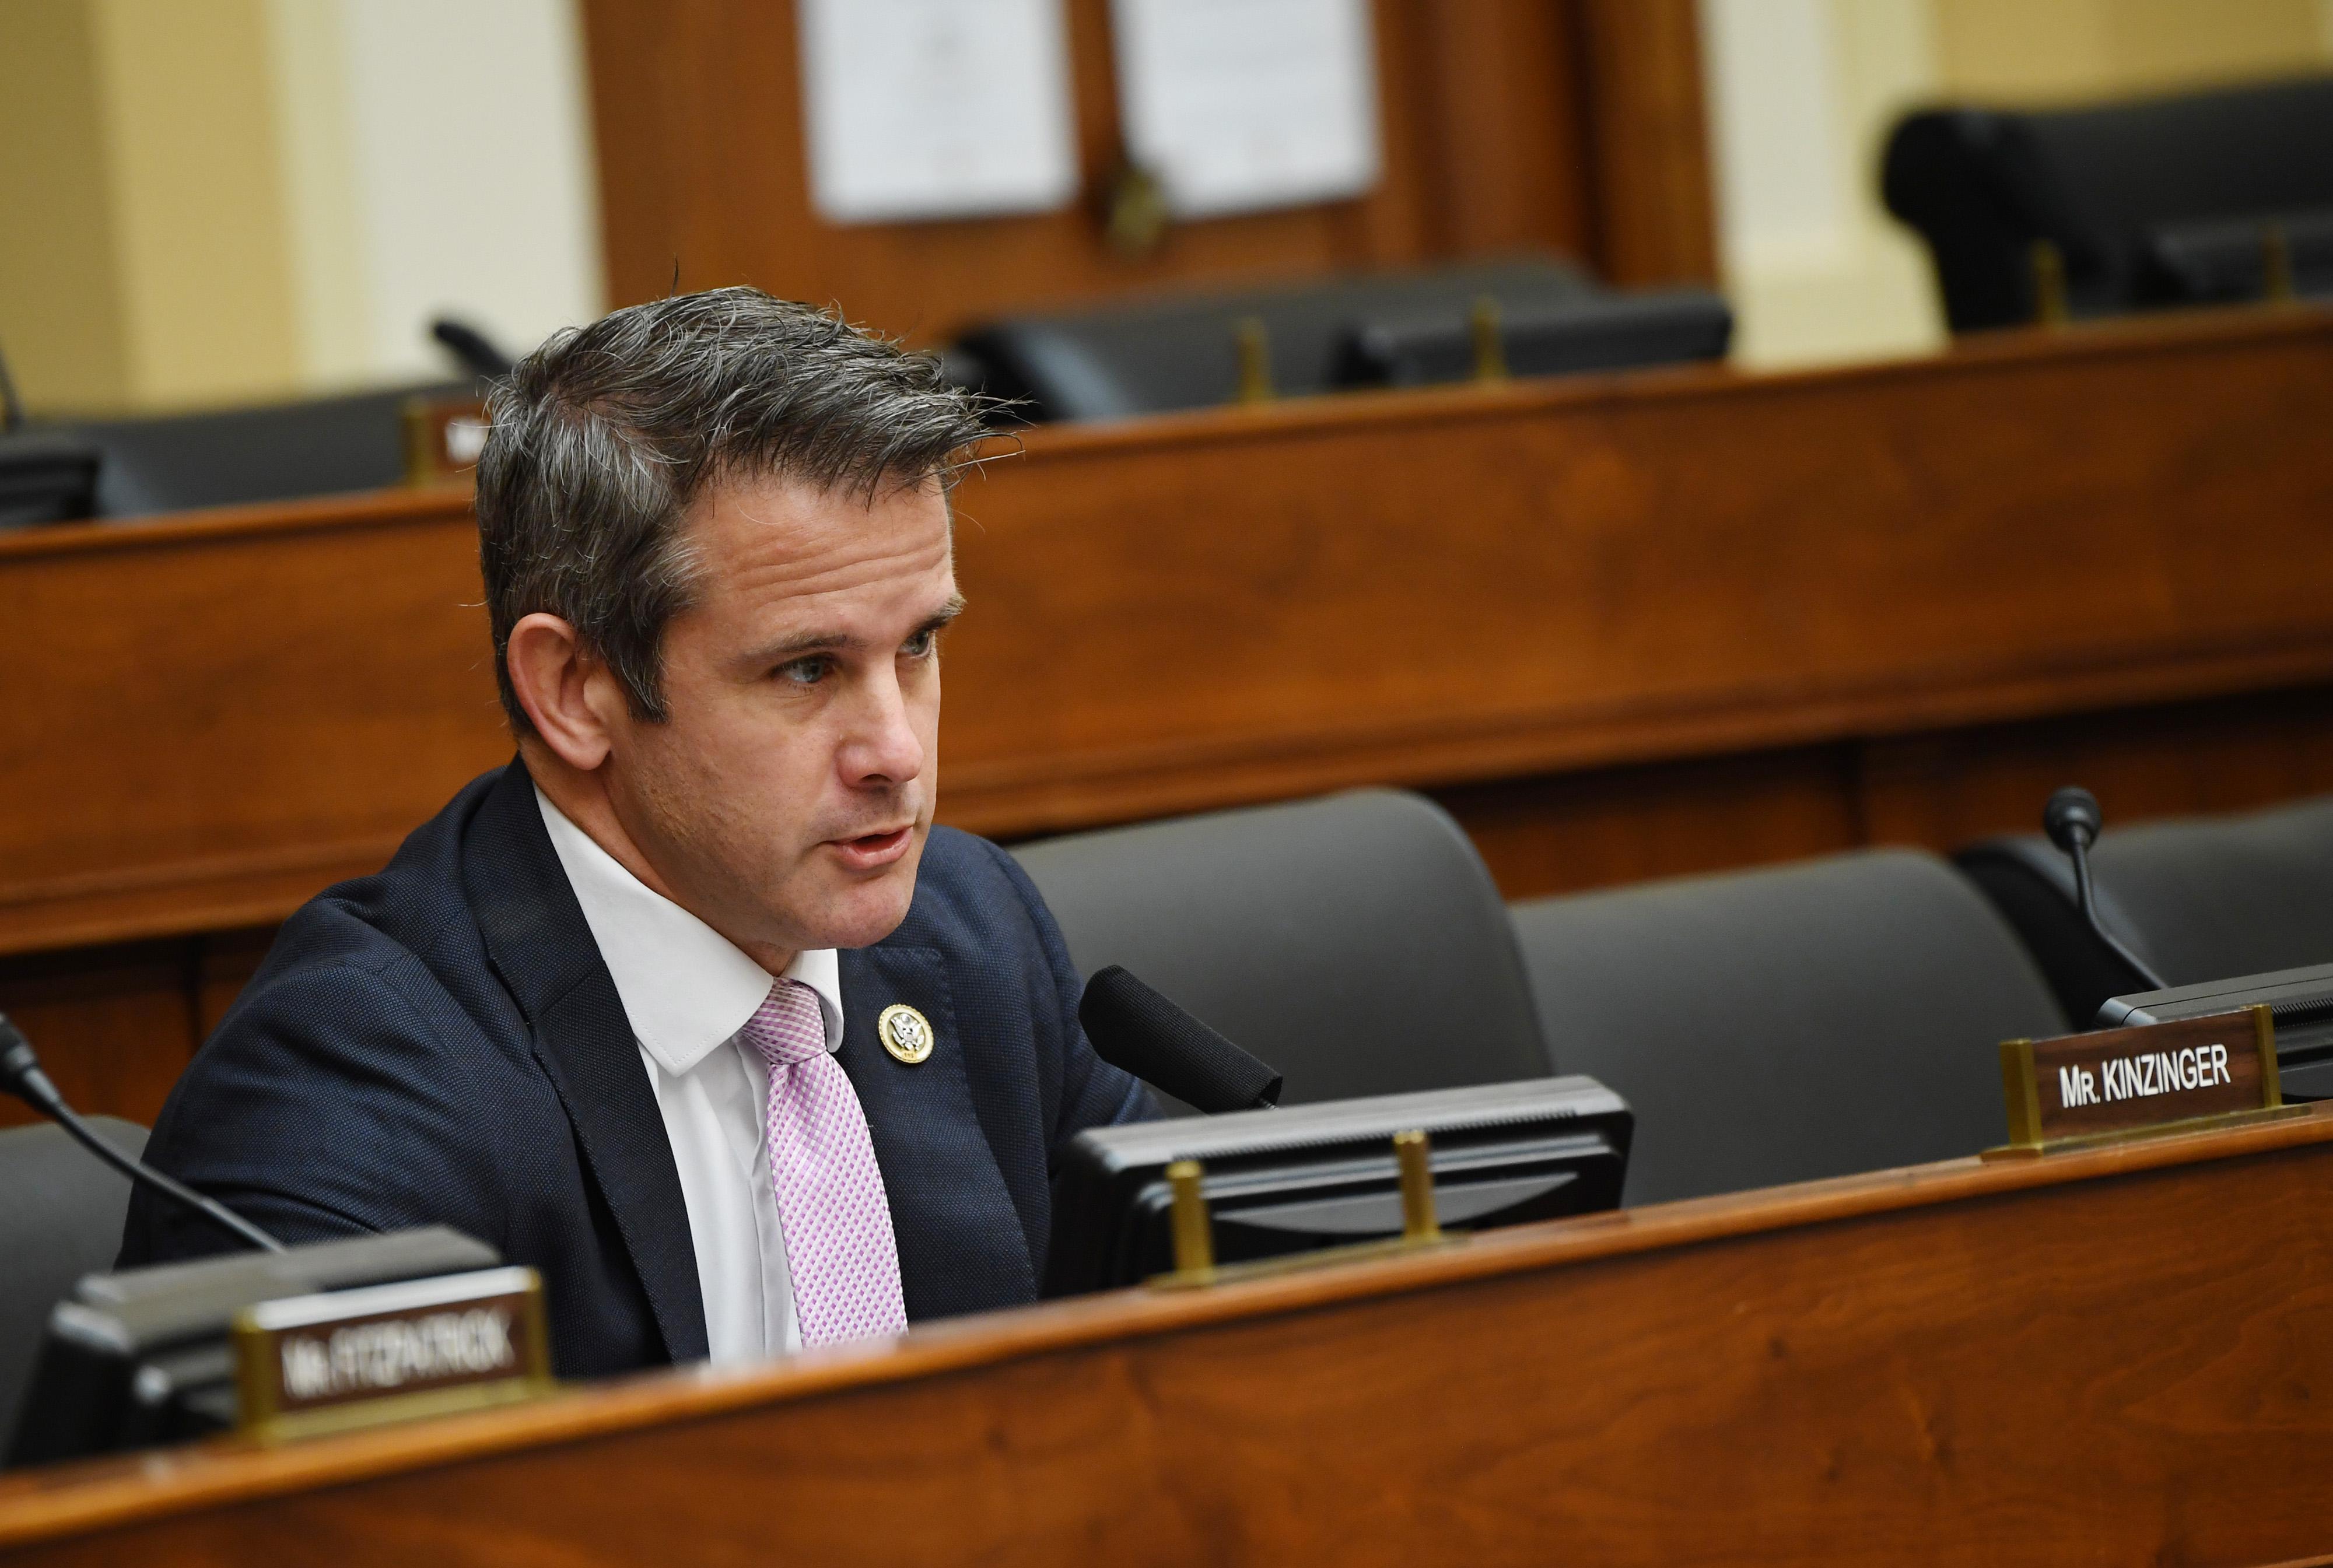 Rep. Adam Kinzinger, R-IL, questions witnesses during a House Committee on Foreign Affairs hearing on Capitol Hill in Washington, D.C. on September 16, 2020. 